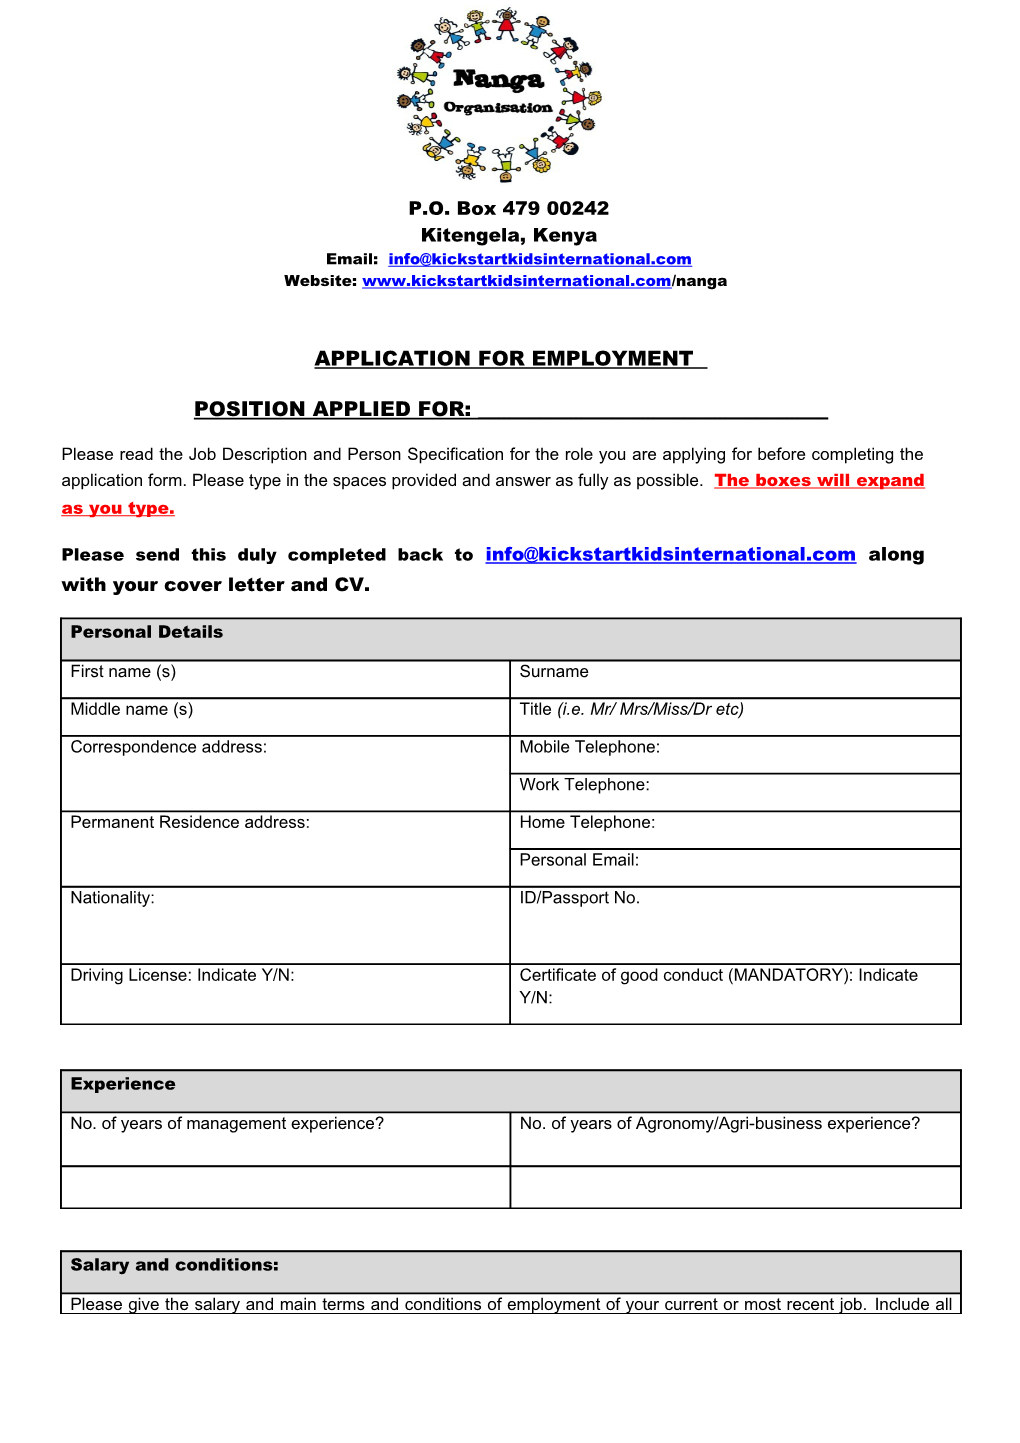 Application for Employment s103